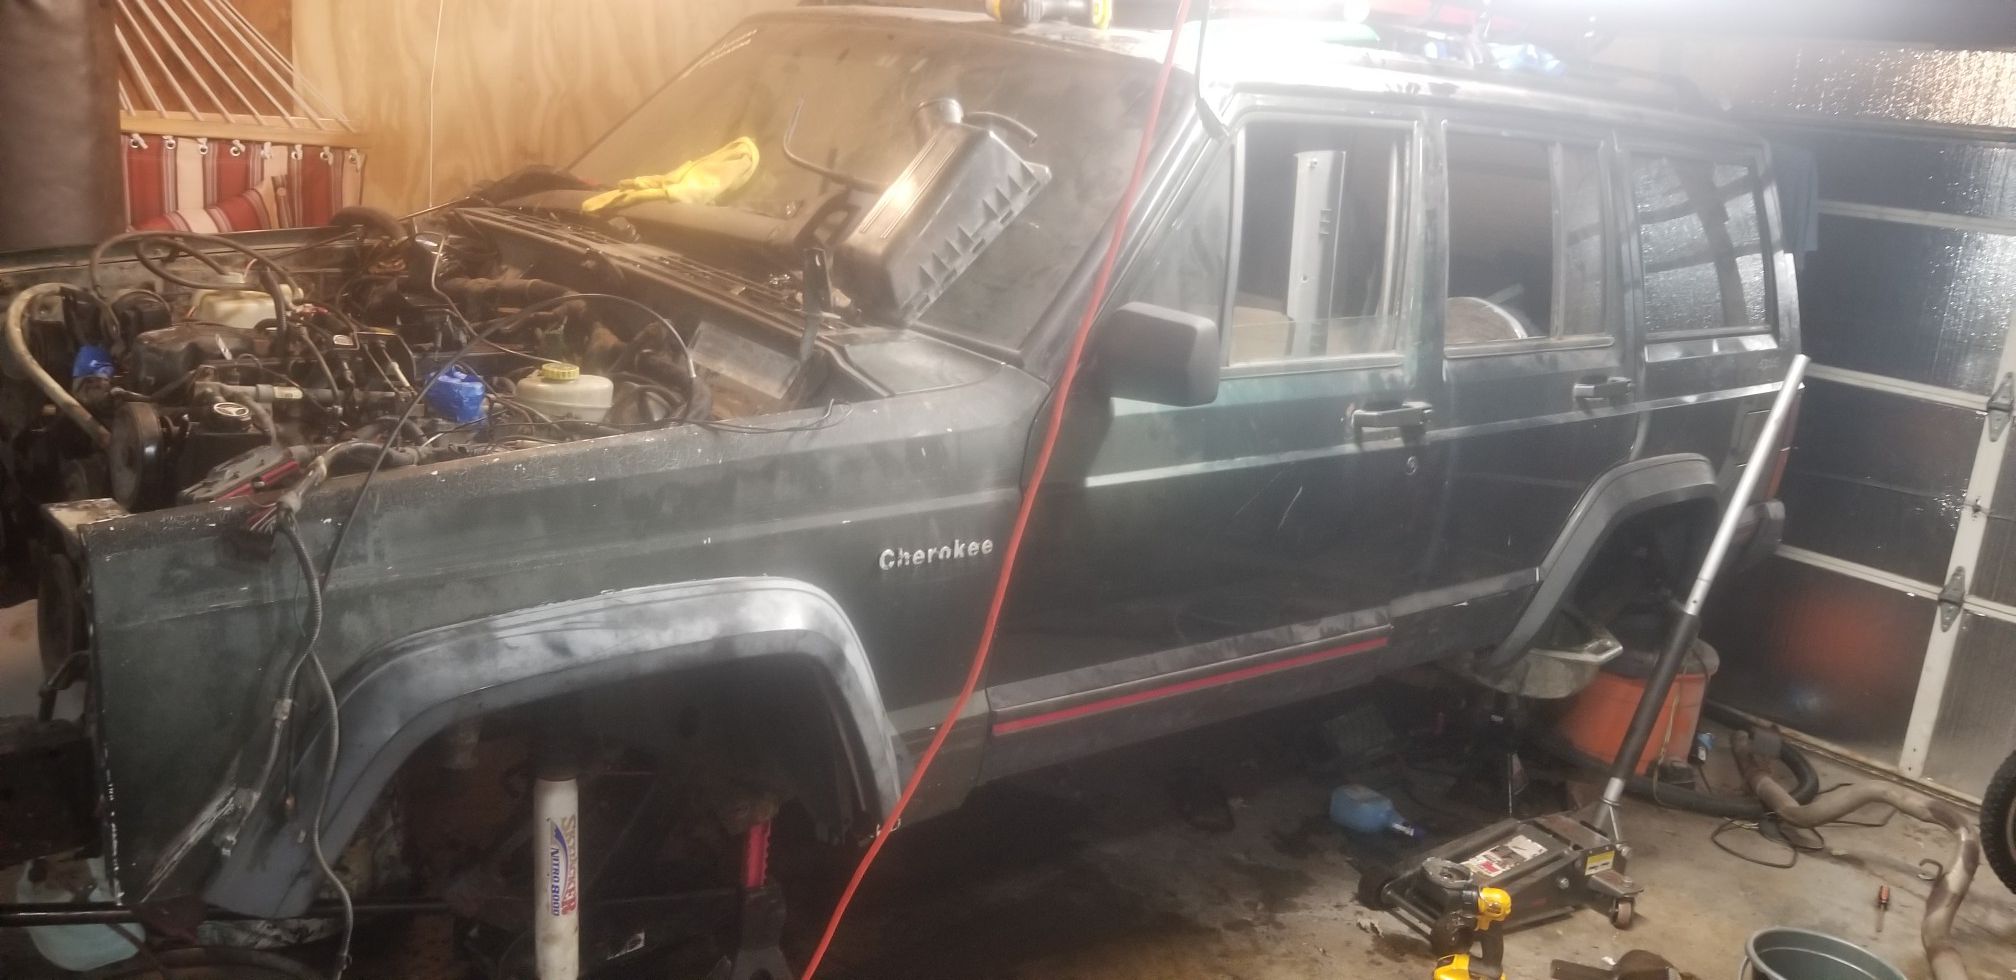 1995 jeep cherokee XJ- parts(mostly body and interior left)